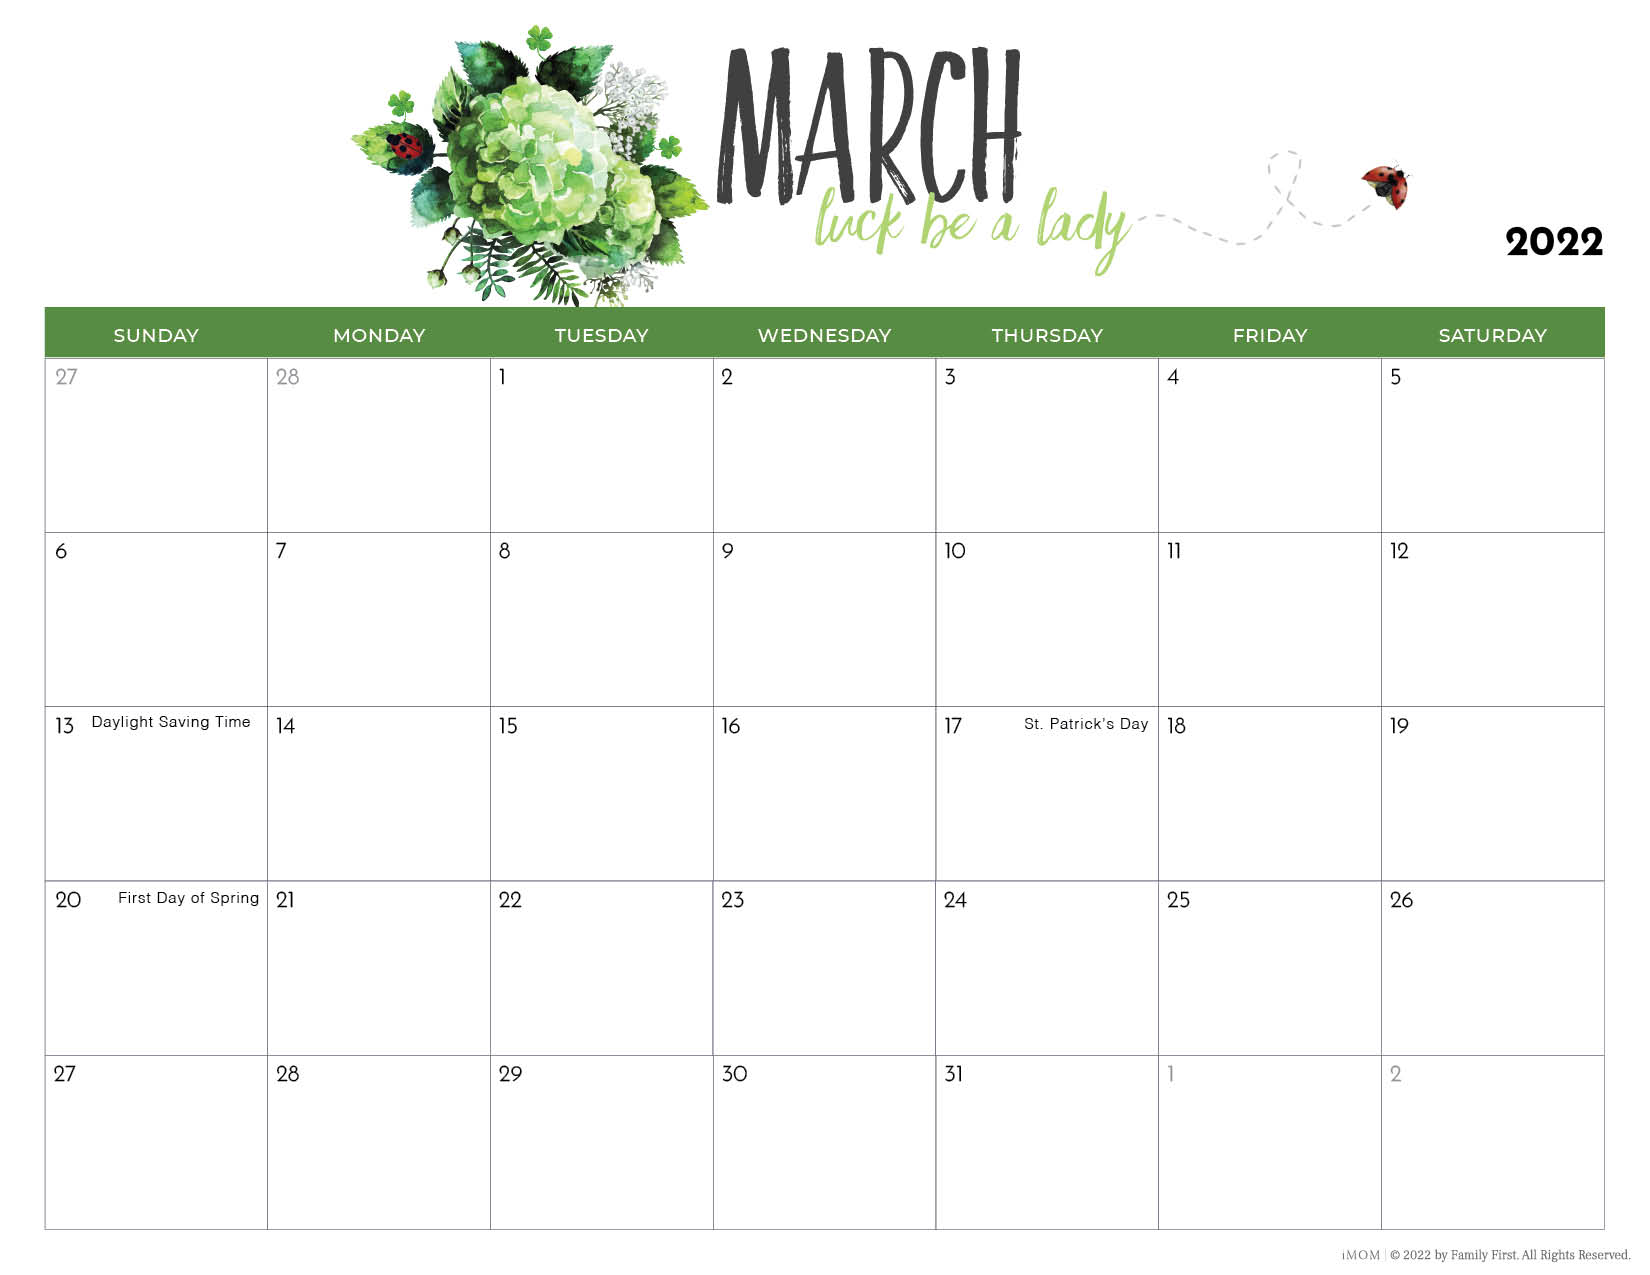 Fillable Monthly Calendar 2022 2022 Printable Calendars For Moms - Imom